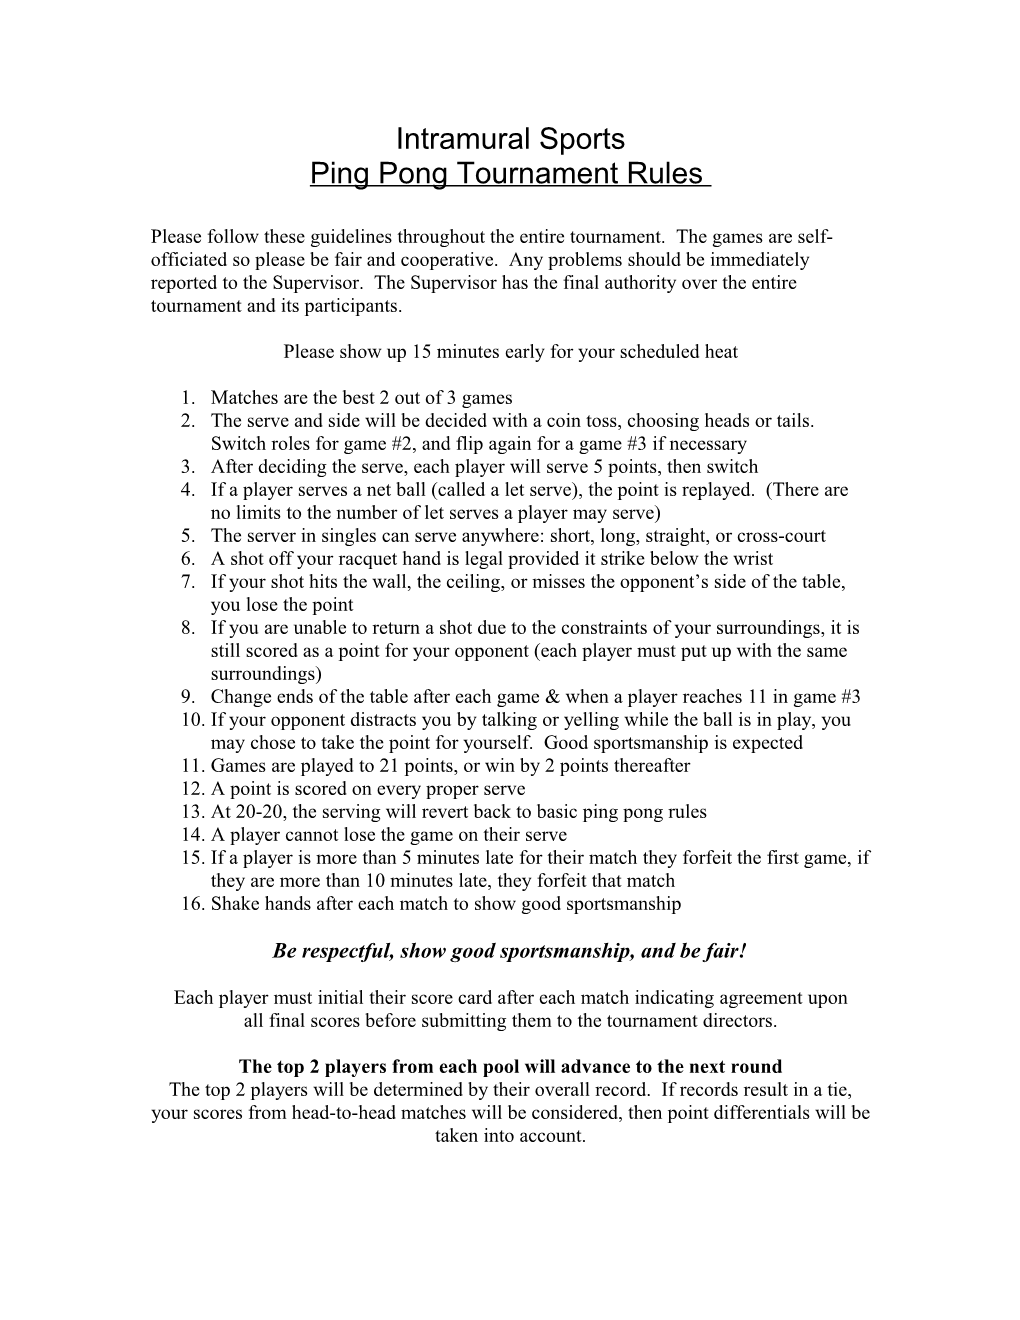 Ping Pong Tournament Rules